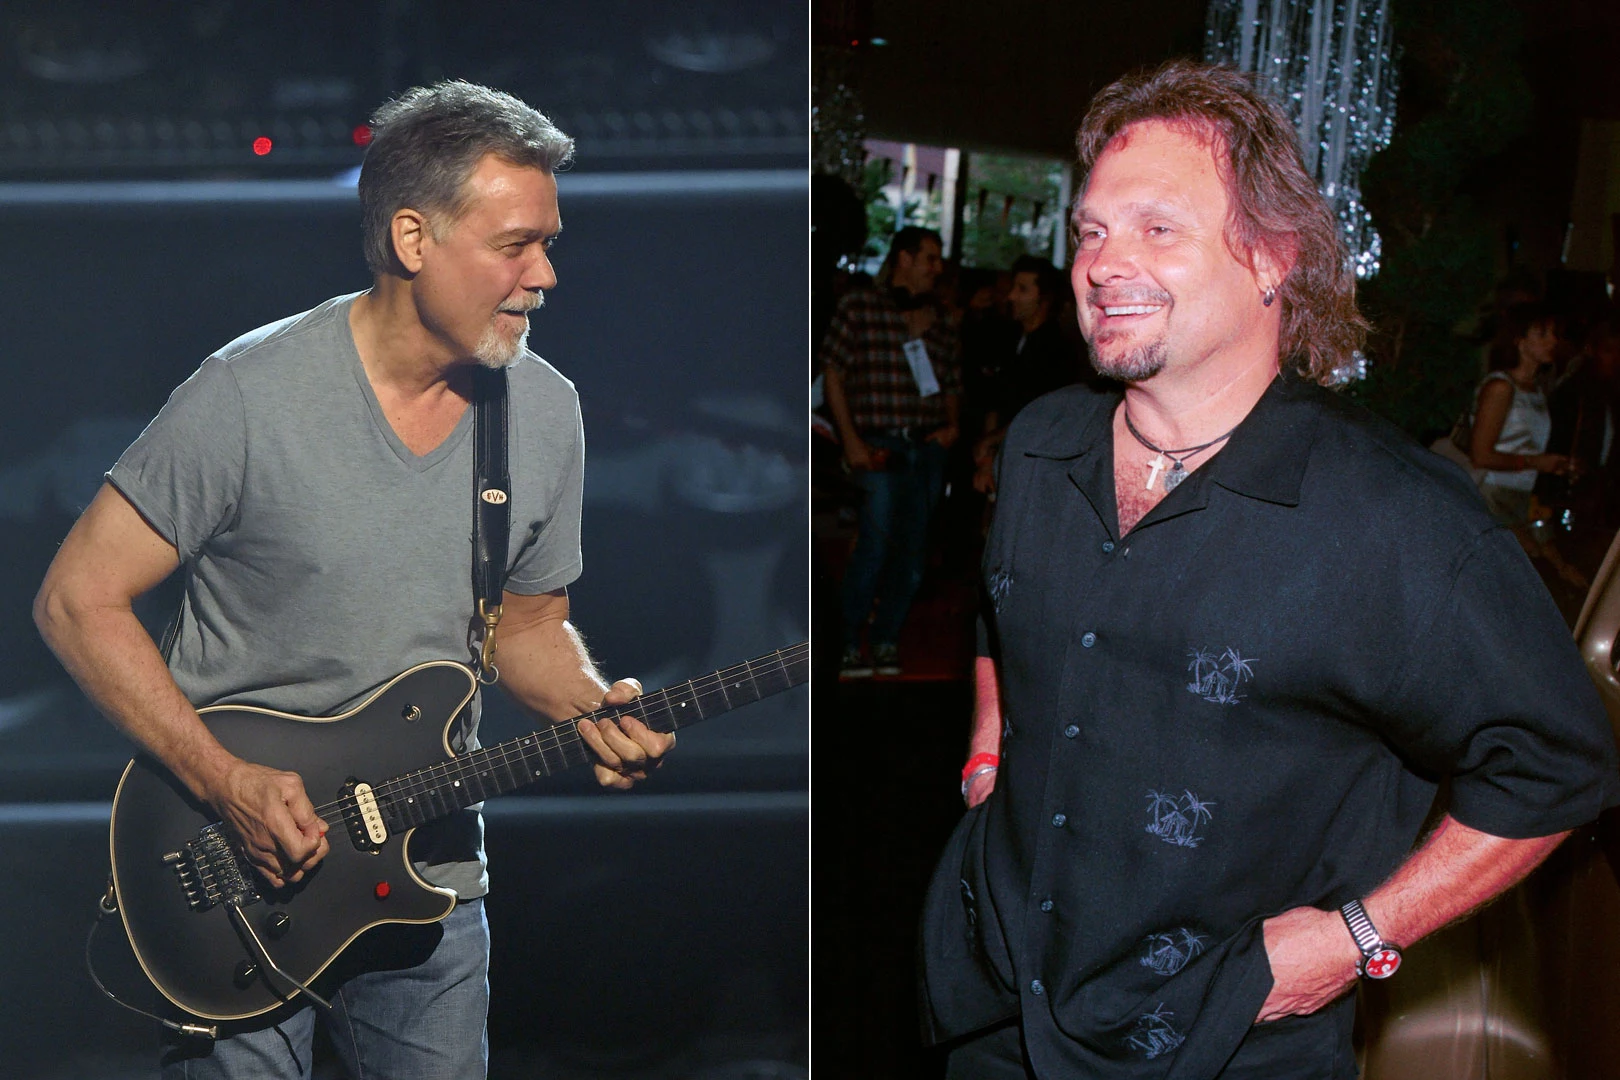 Manager Confirms Van Halen Intended to Reunite With Bassist